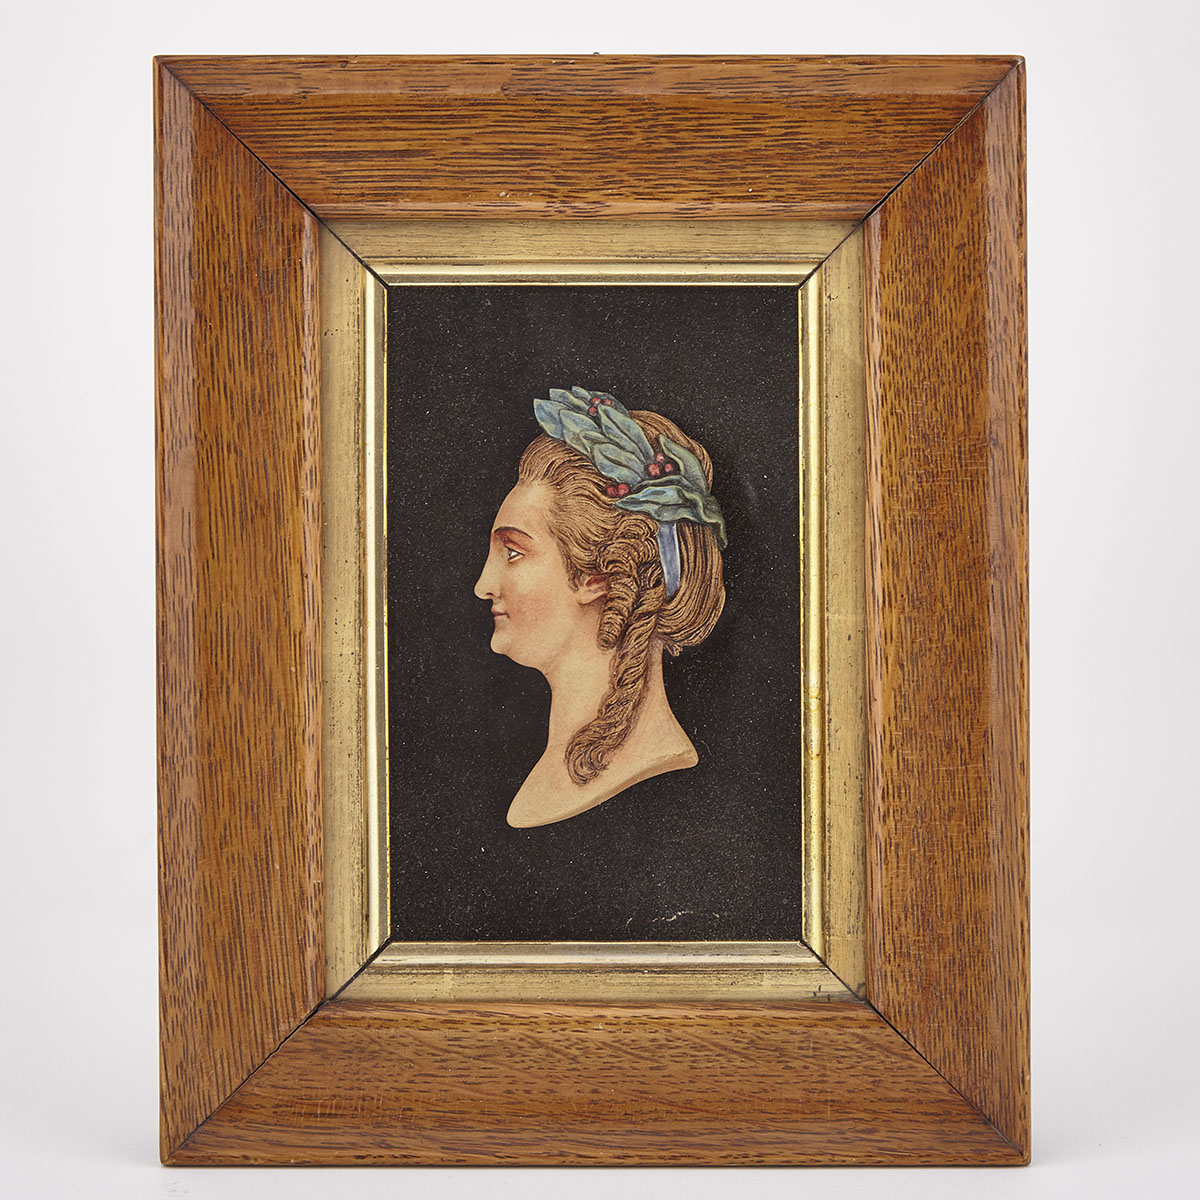 Polychromed Wax Relief Portrait of Catherine the Great of Russia, 19th century